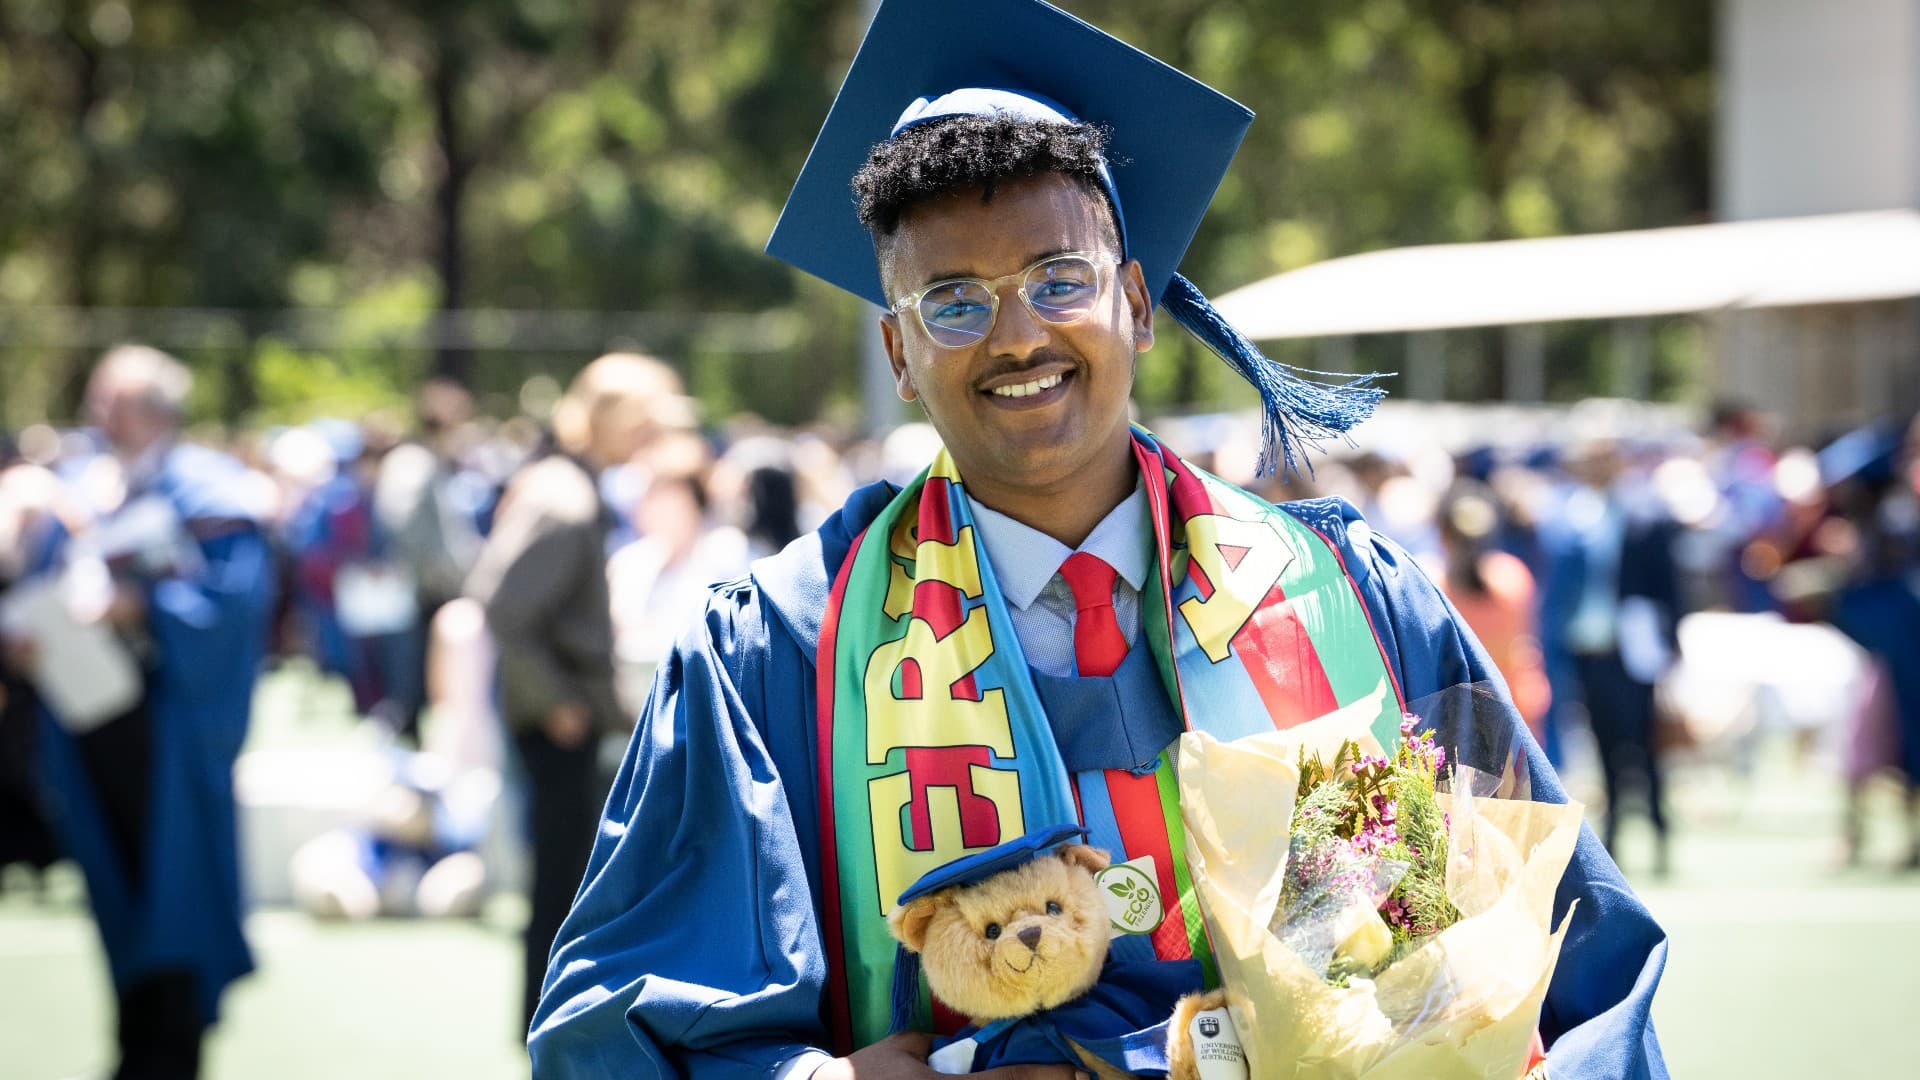 Teklemariam overcomes challenges to achieve his dream